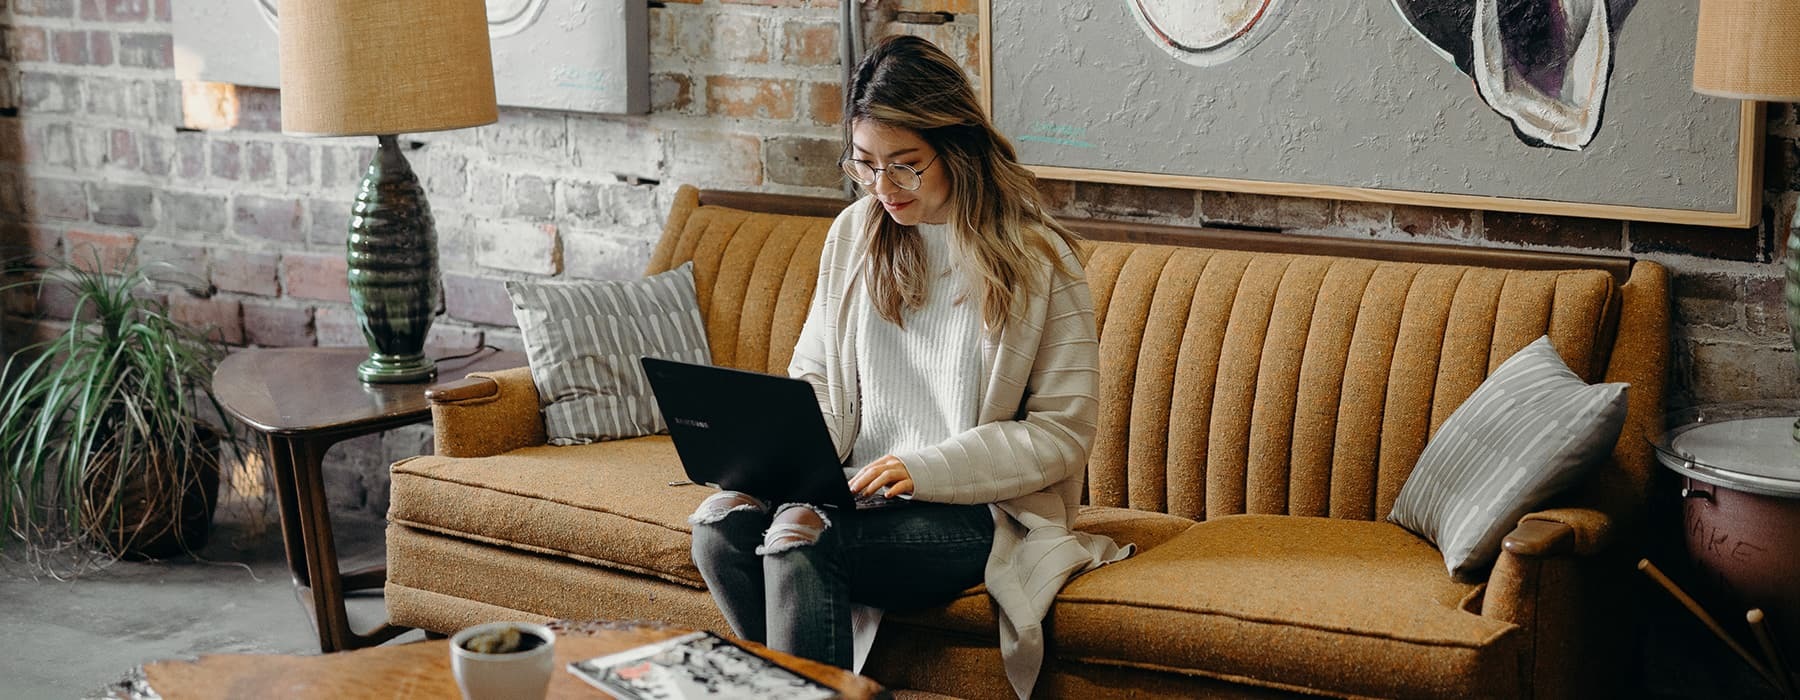 lifestyle image of a professional woman typing inside a comfortable lounge area